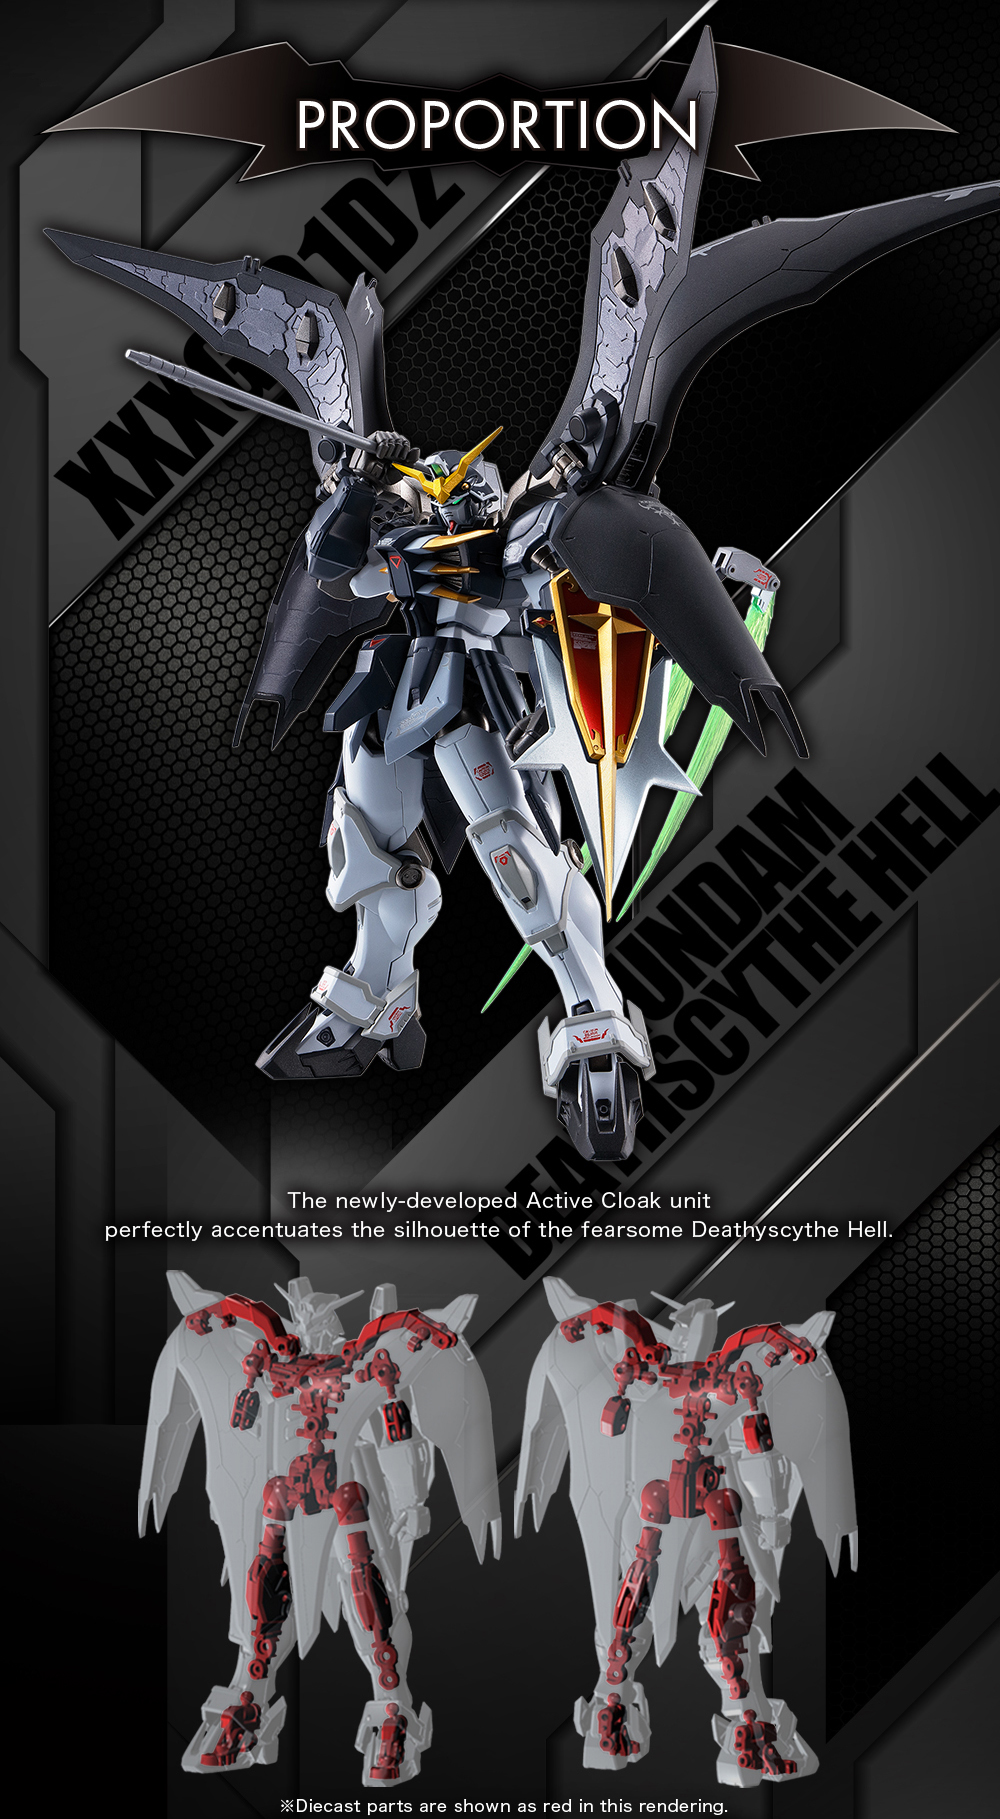 The newly-developed Active Cloak unit, perfectly accentuates the silhouette of the fearsome Deathyscythe Hell., ※Diecast parts are shown as red in this rendering.